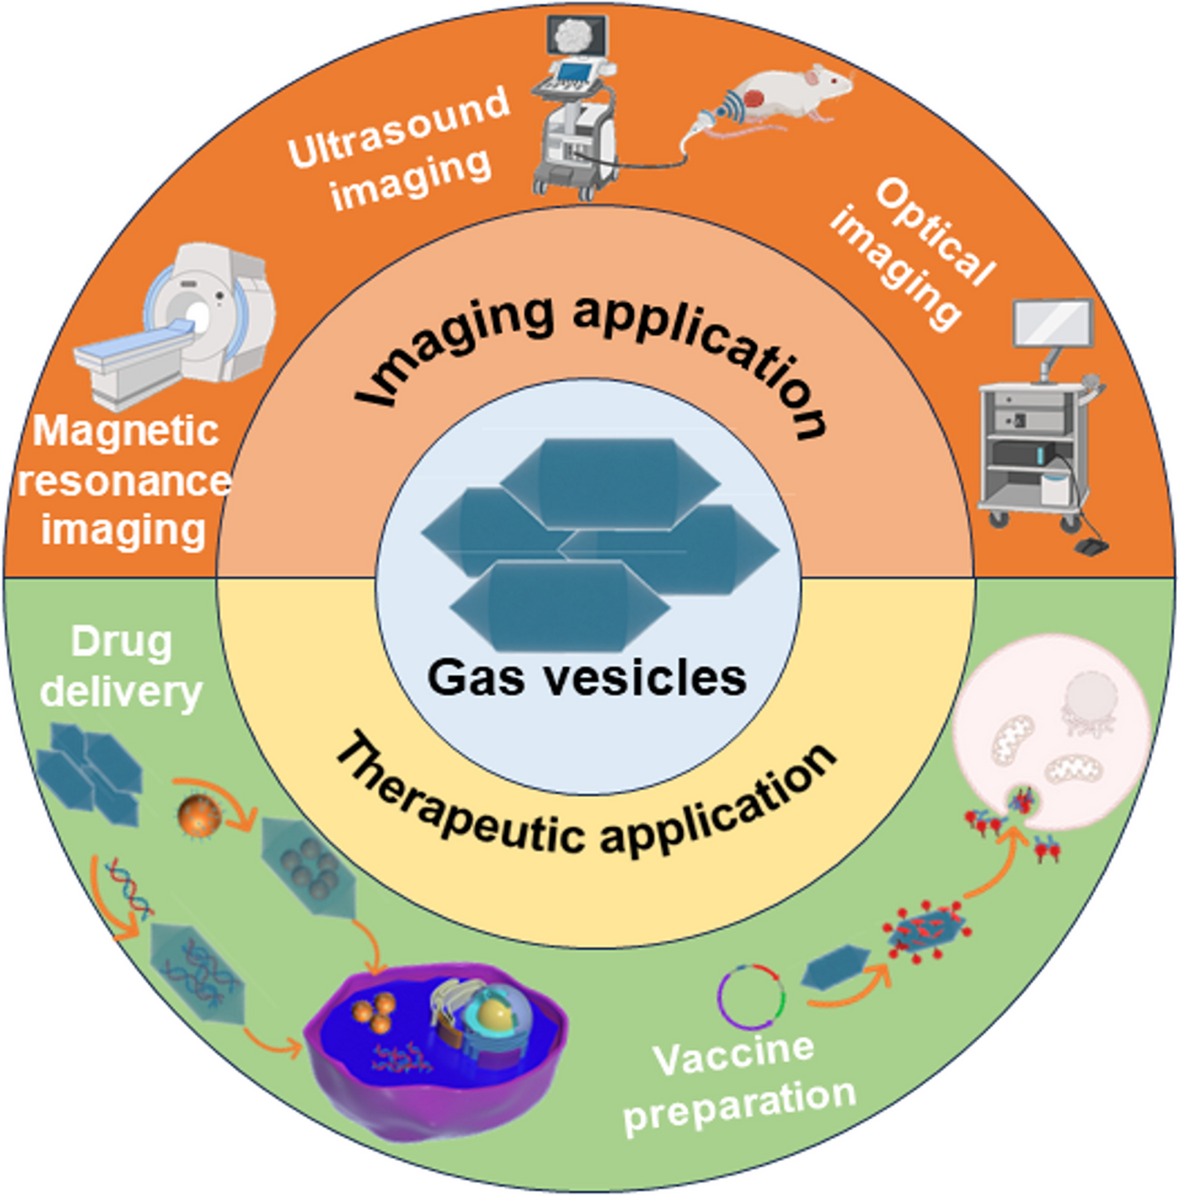 Advances in the application of gas vesicles in medical imaging and disease treatment